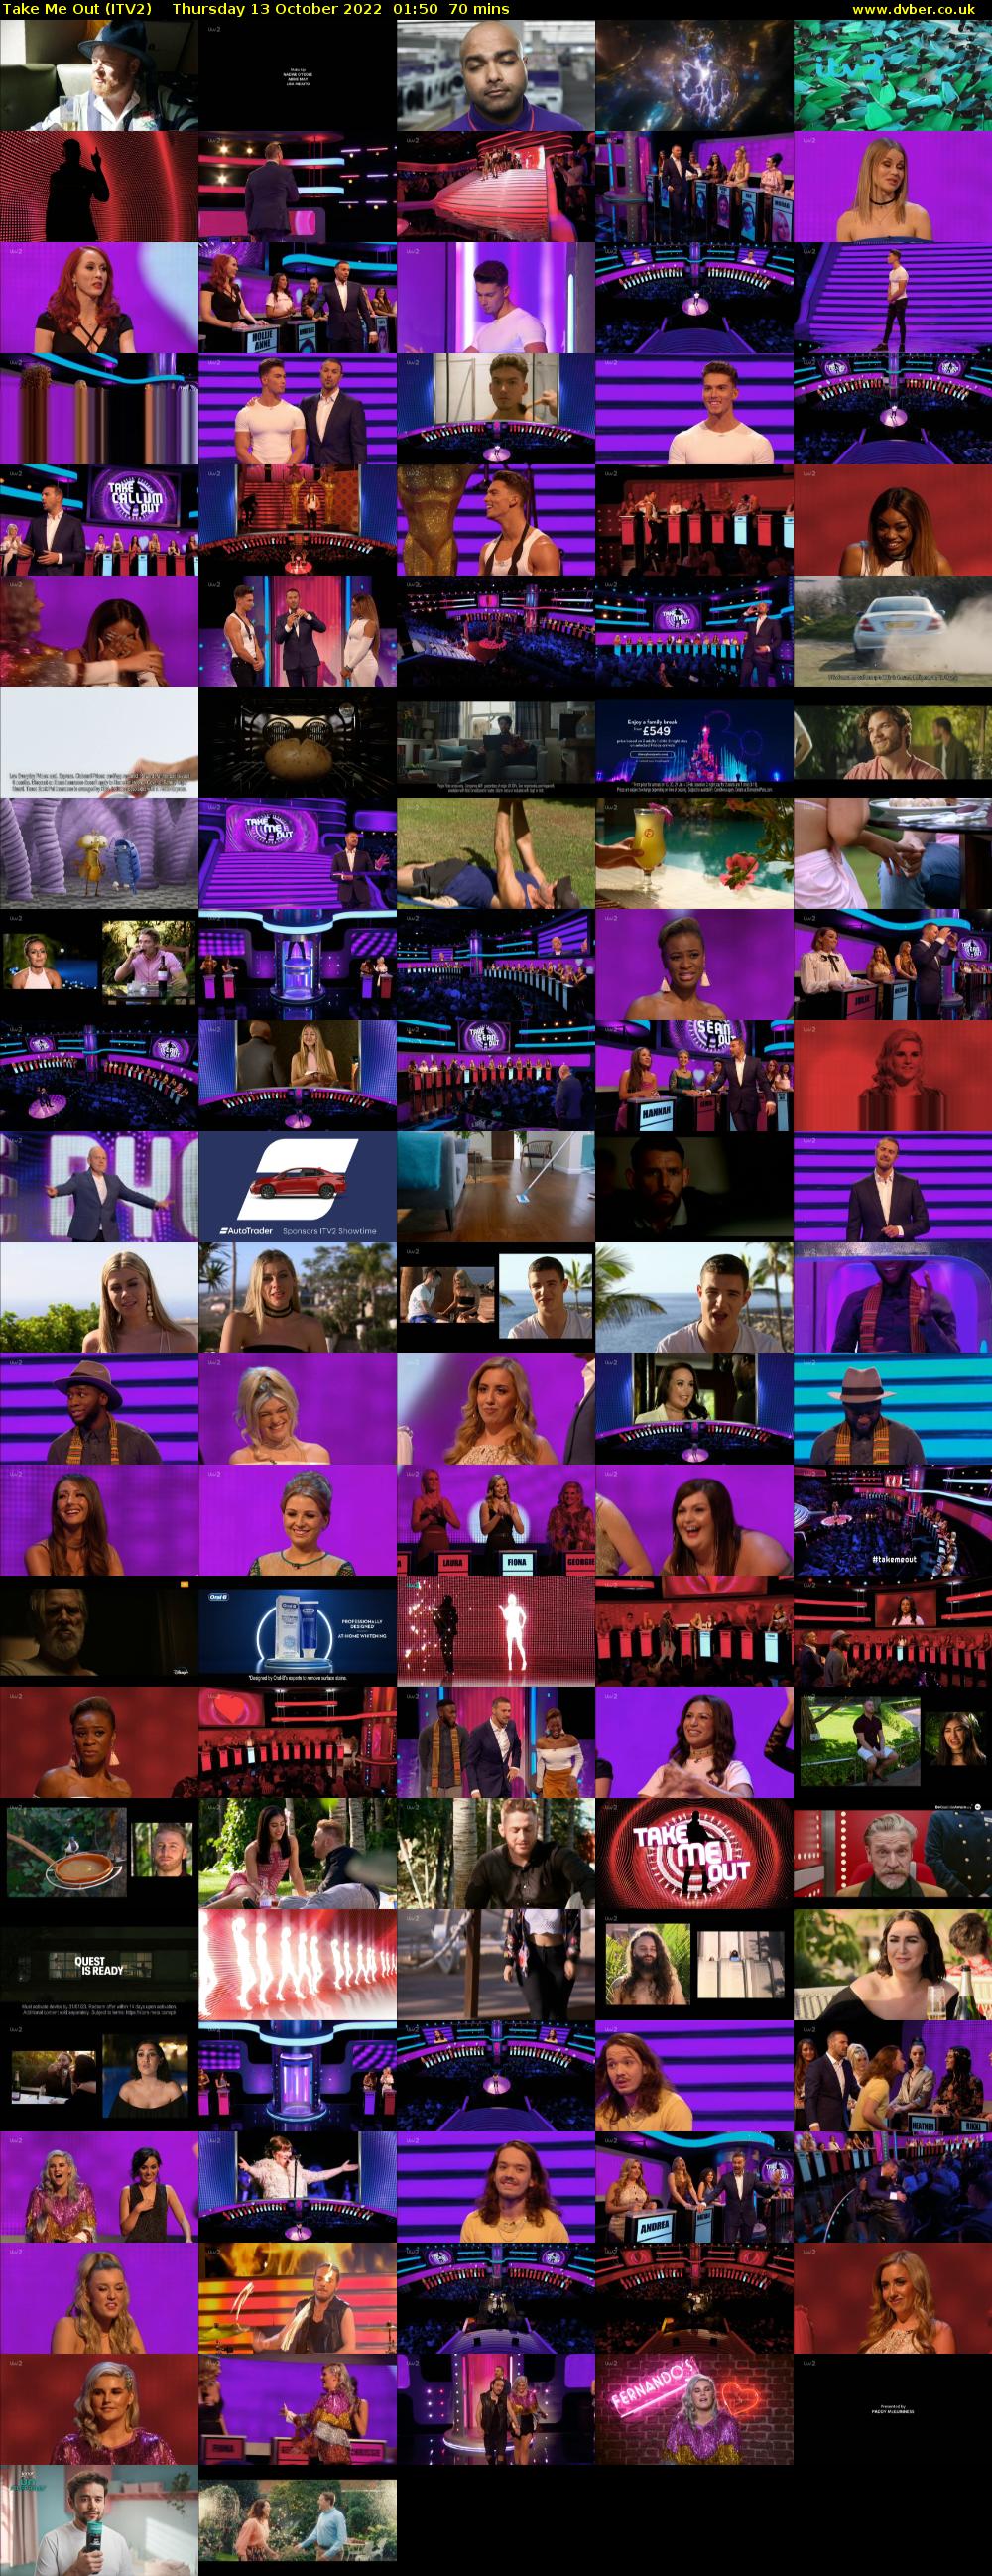 Take Me Out (ITV2) Thursday 13 October 2022 01:50 - 03:00